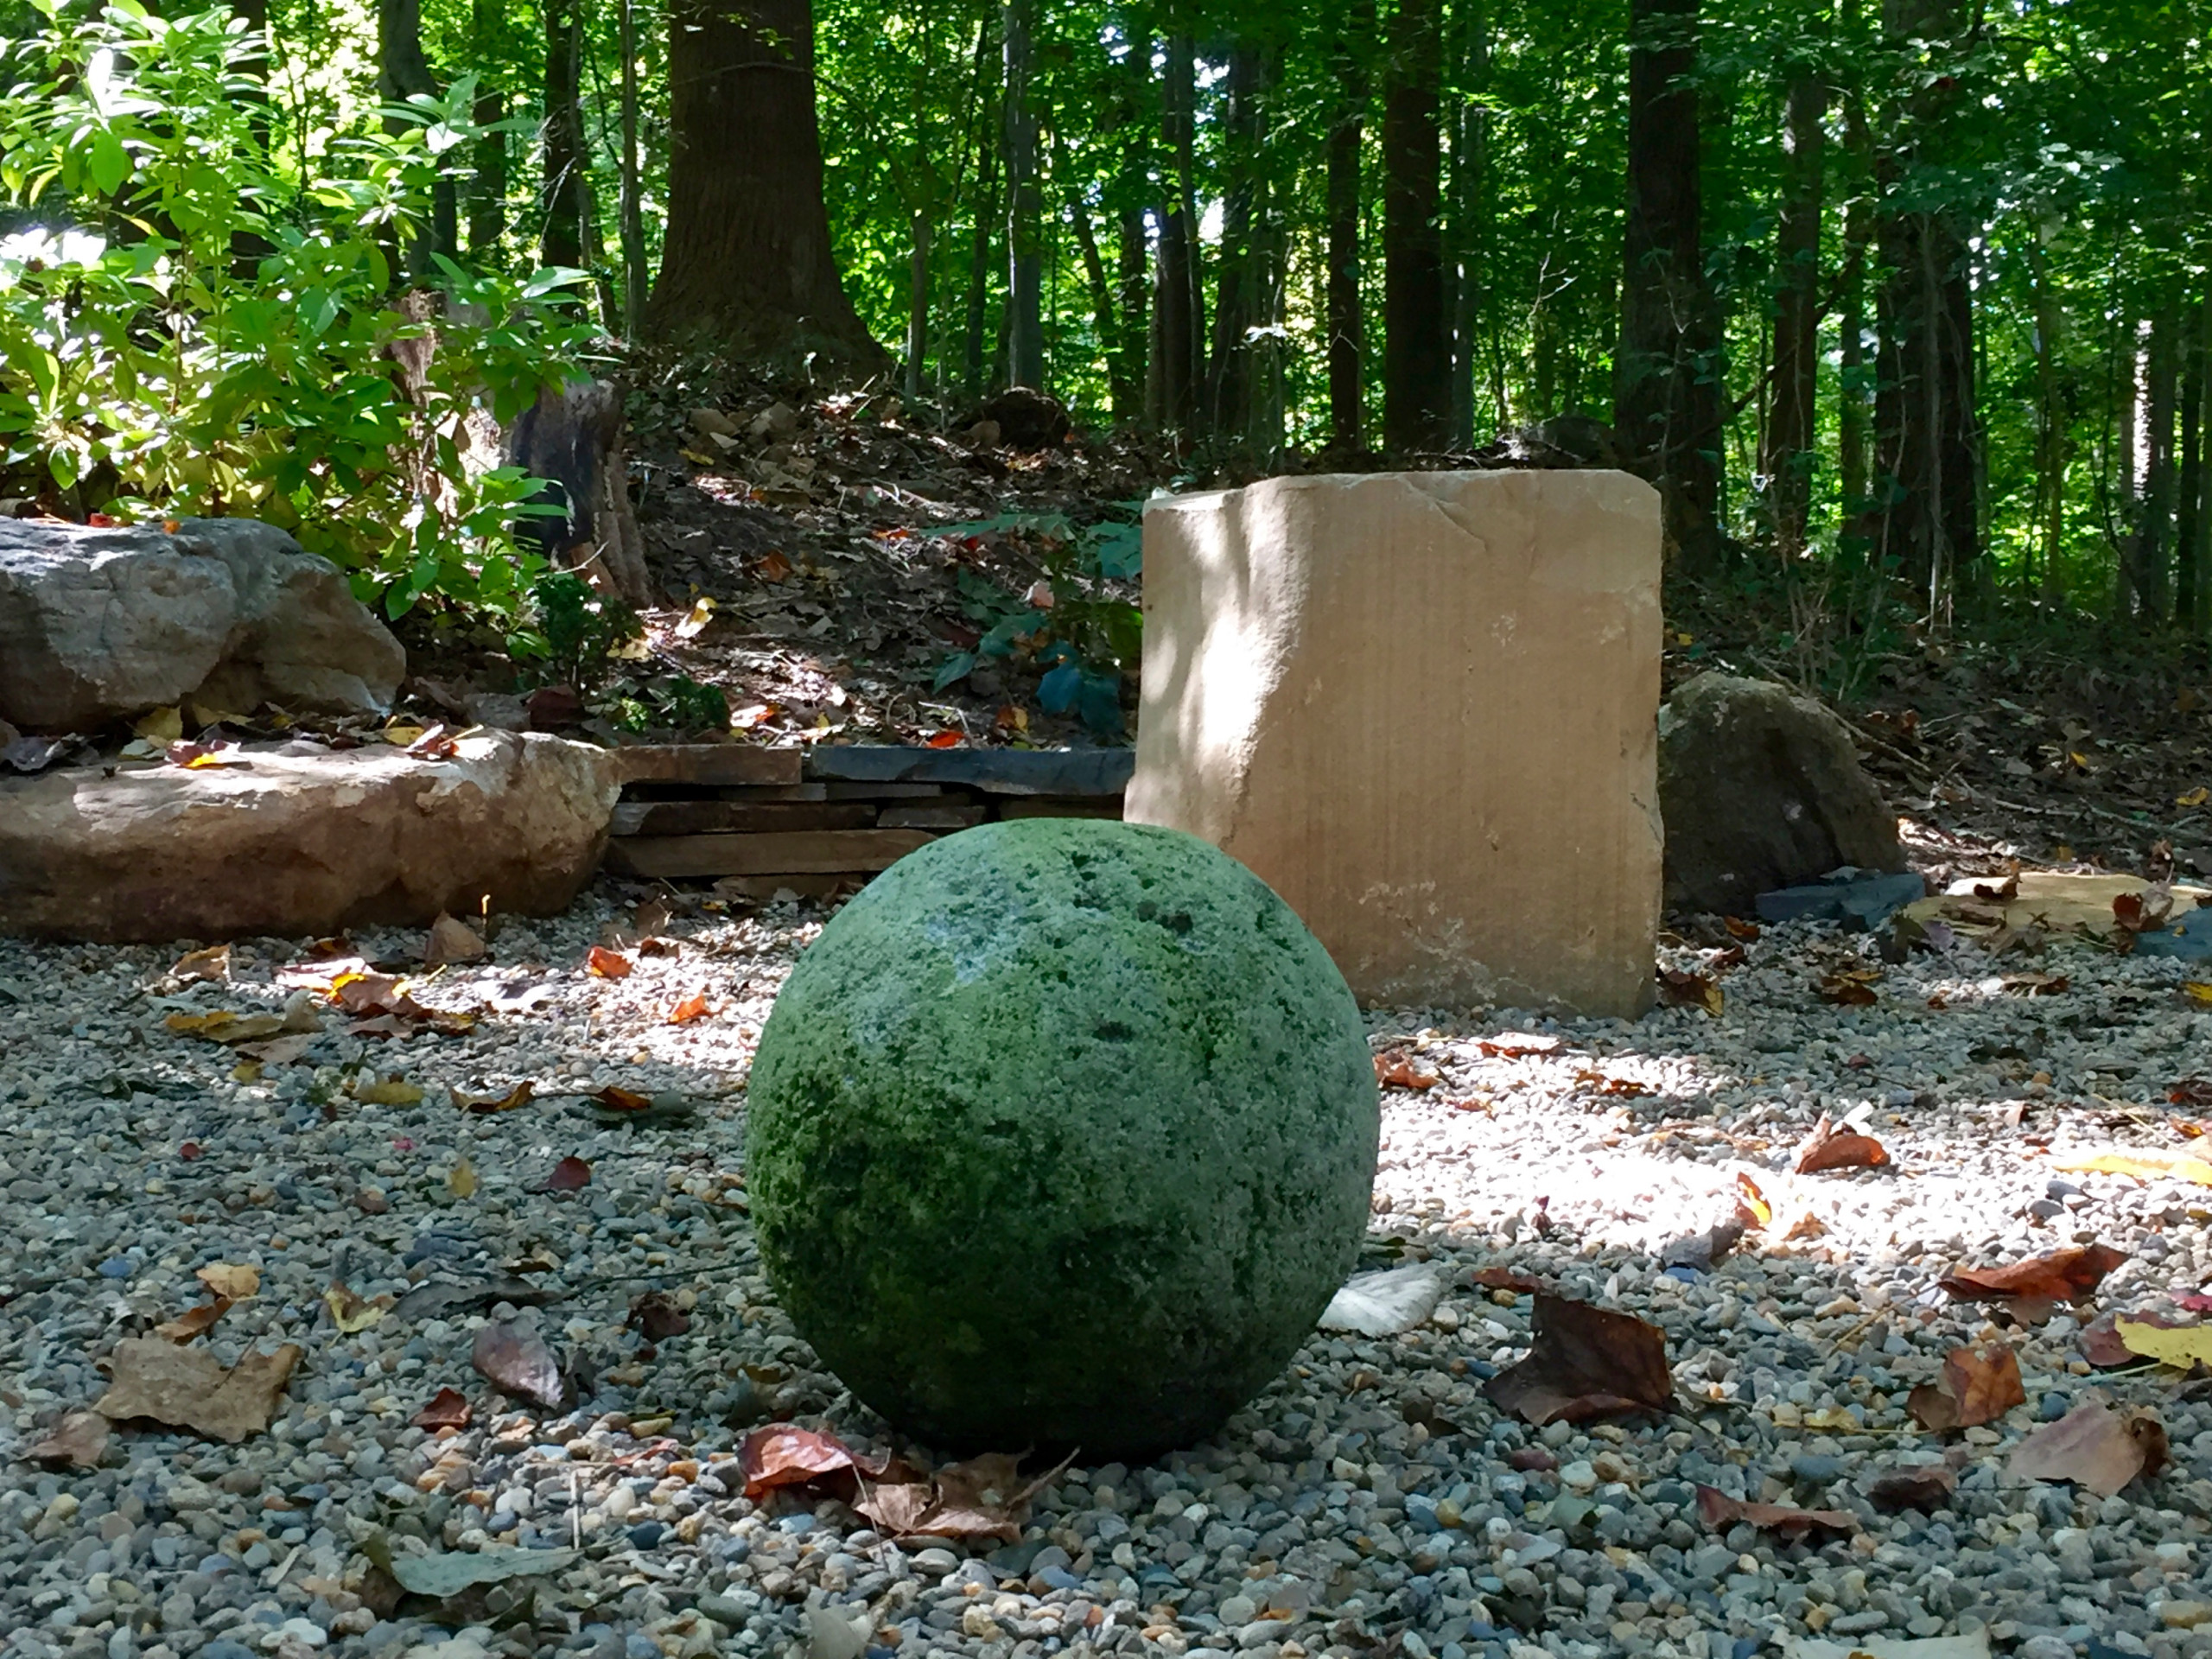 Stone sphere and seating stone